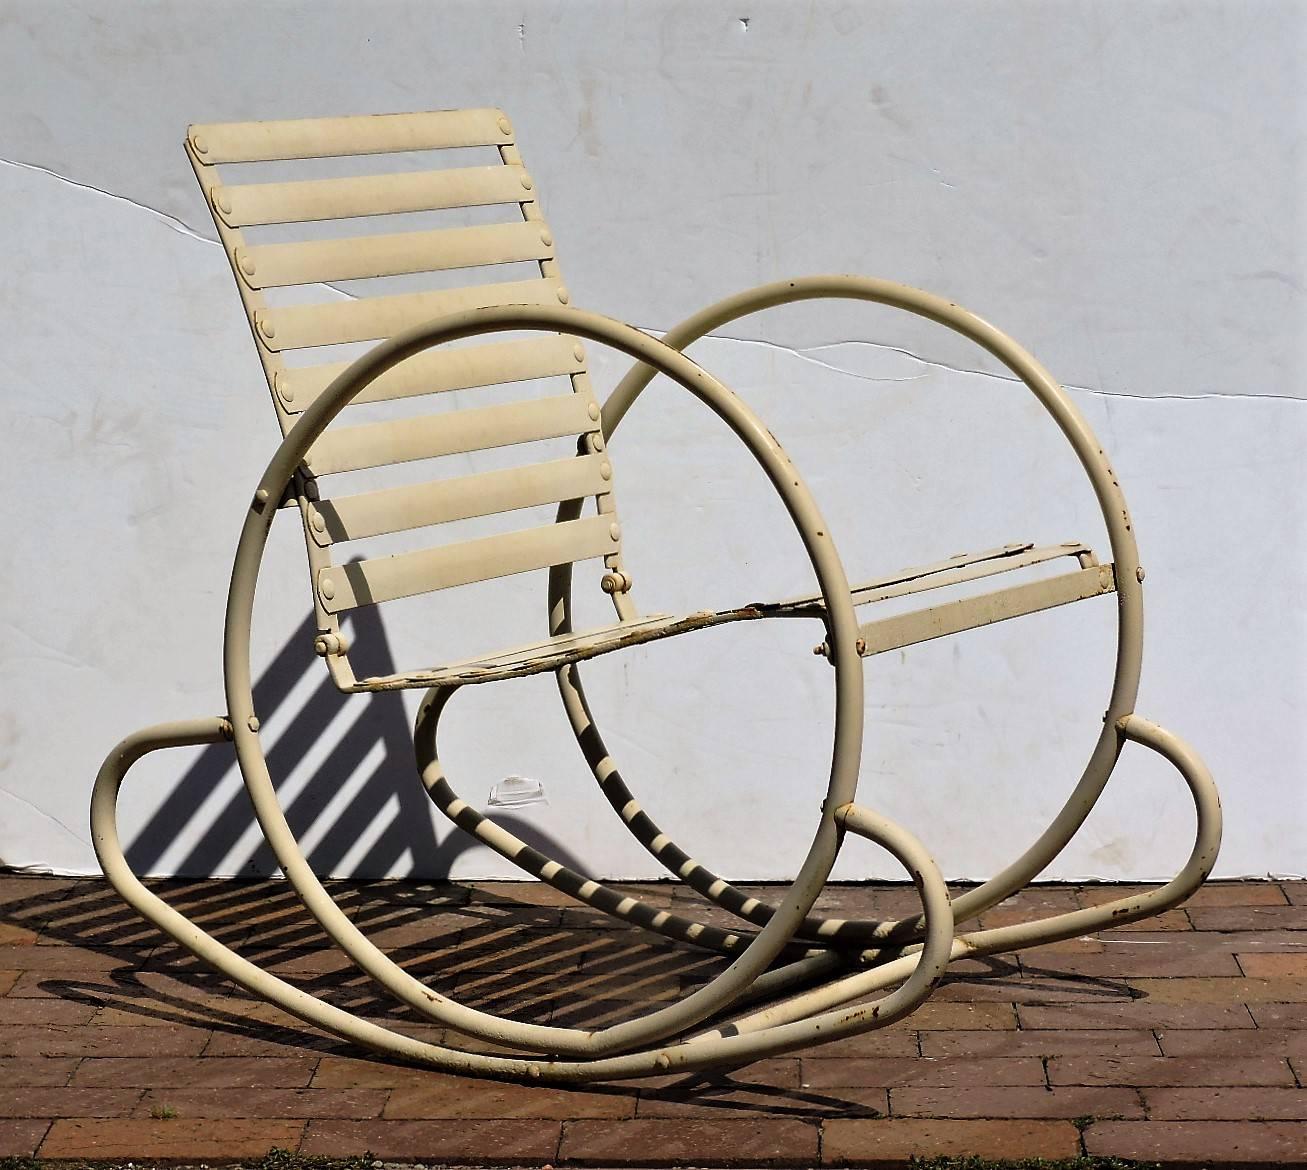 Streamlined American Art Deco slatted and riveted tubular steel  patio deck garden rocking chairs in old cream white painted surface. The chair with continuous sculptural large round hoop sides and horizontal slats is a very hard to find form rare